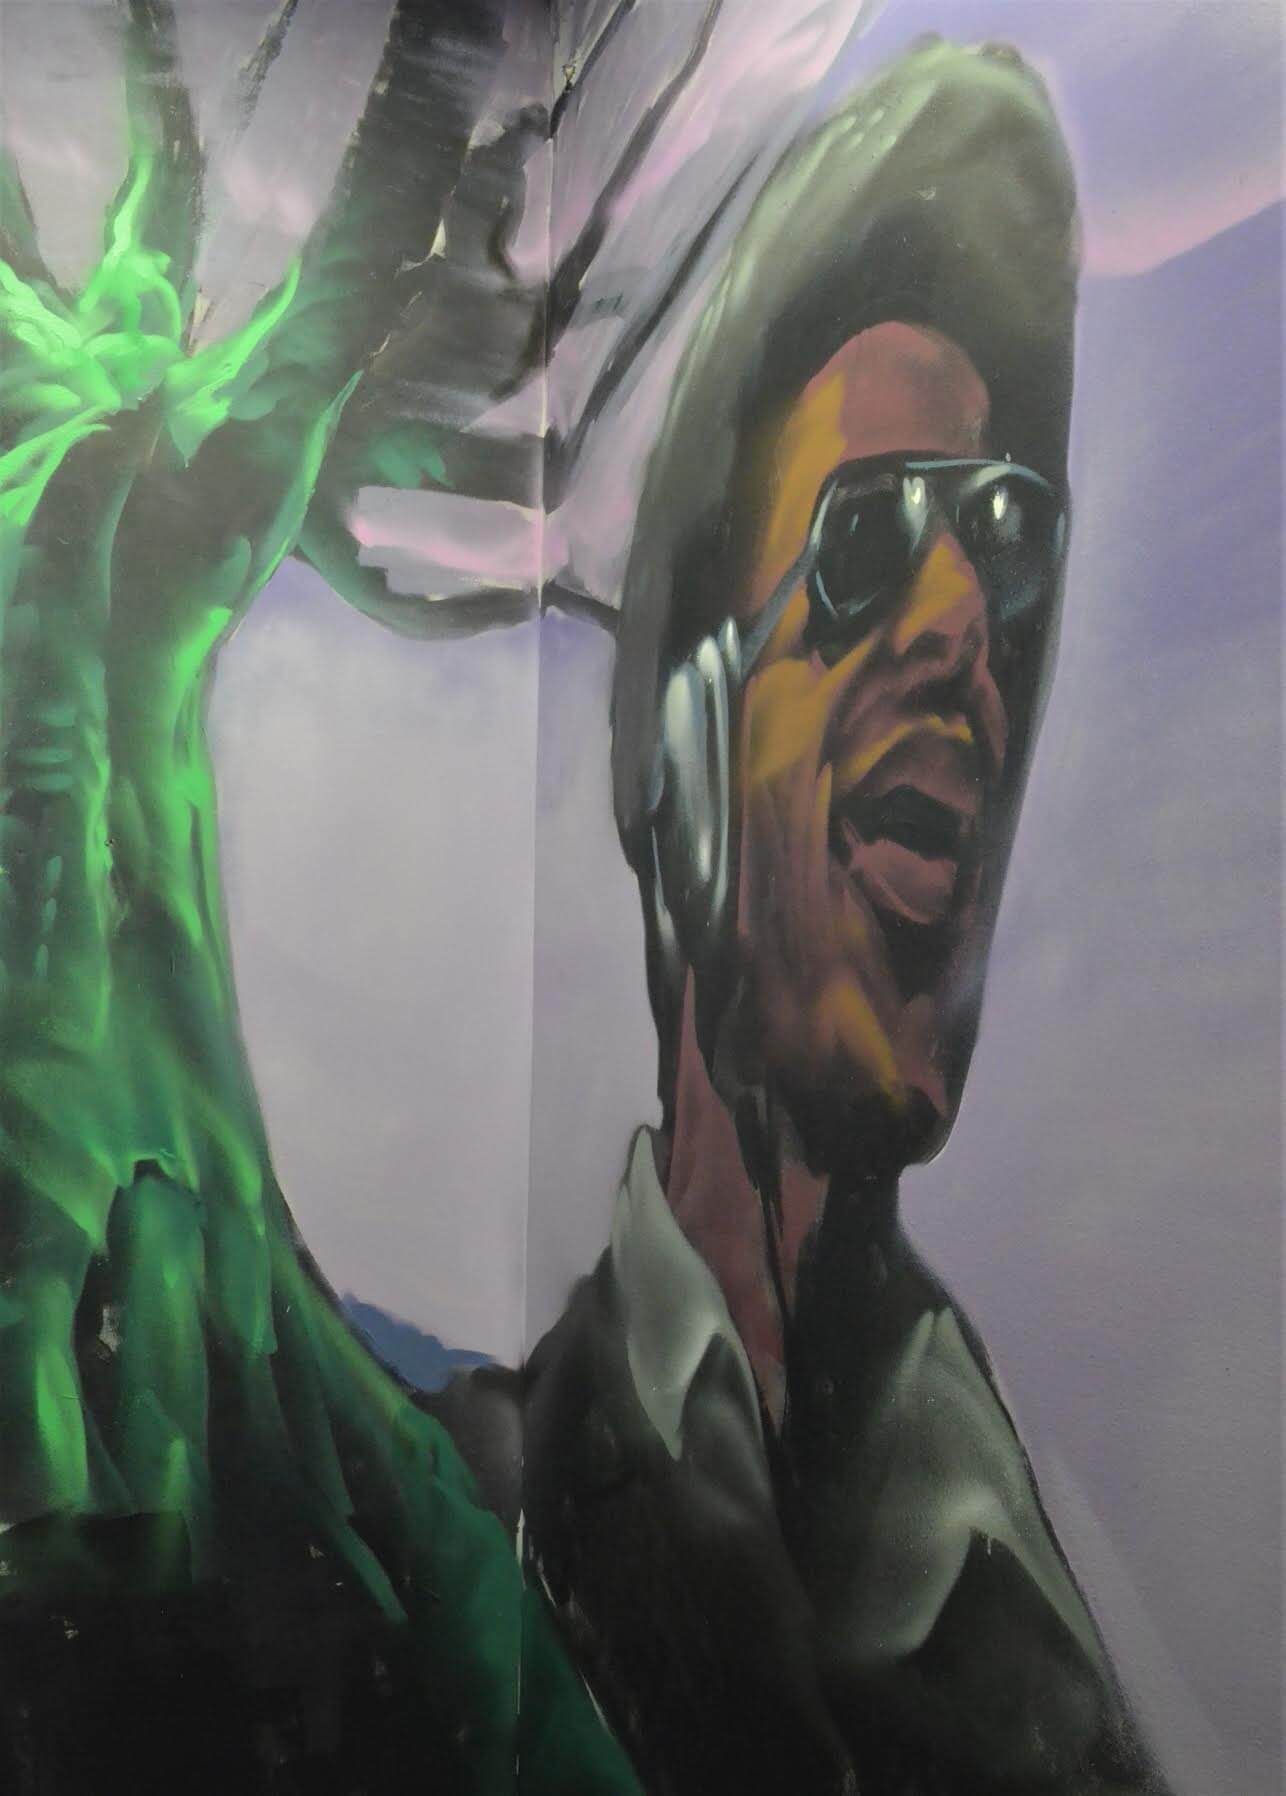 You can glimpse another one of our heroes, Stevie Wonder, as you enter the venue.